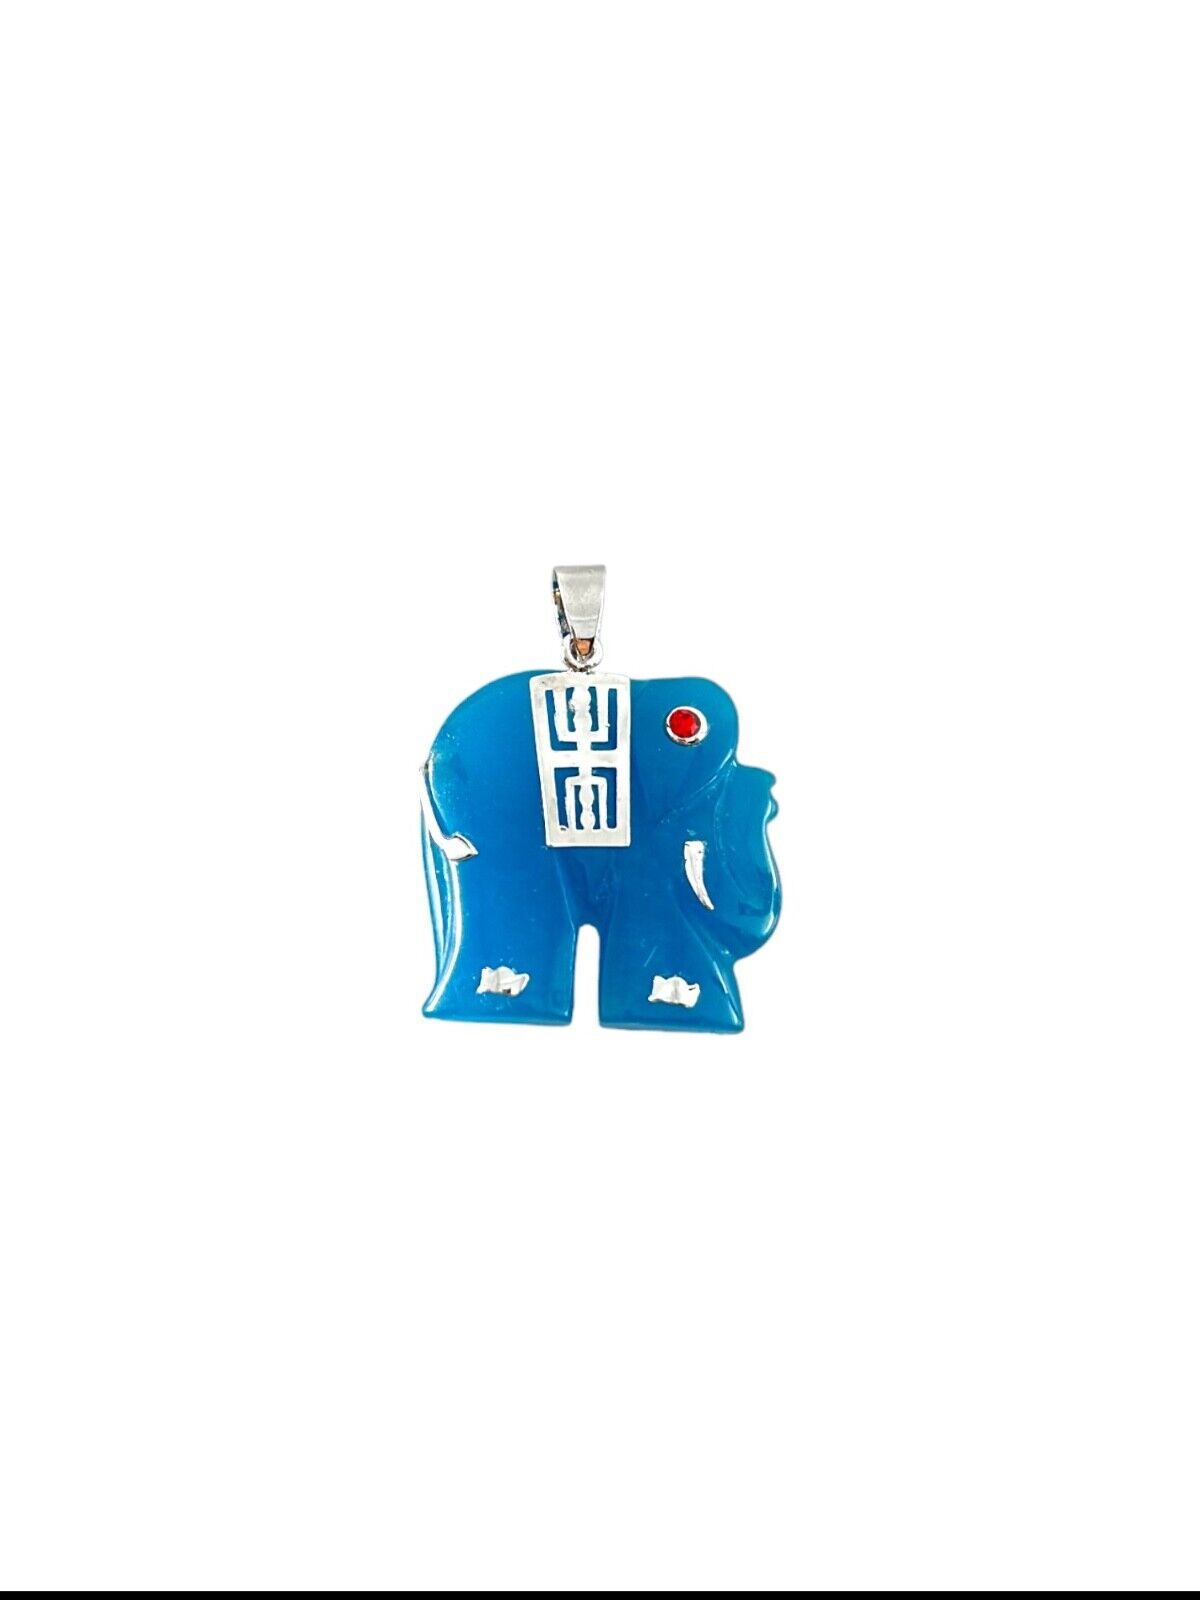 .925 Sterling Silver Elephant Lucky Charm Pendant